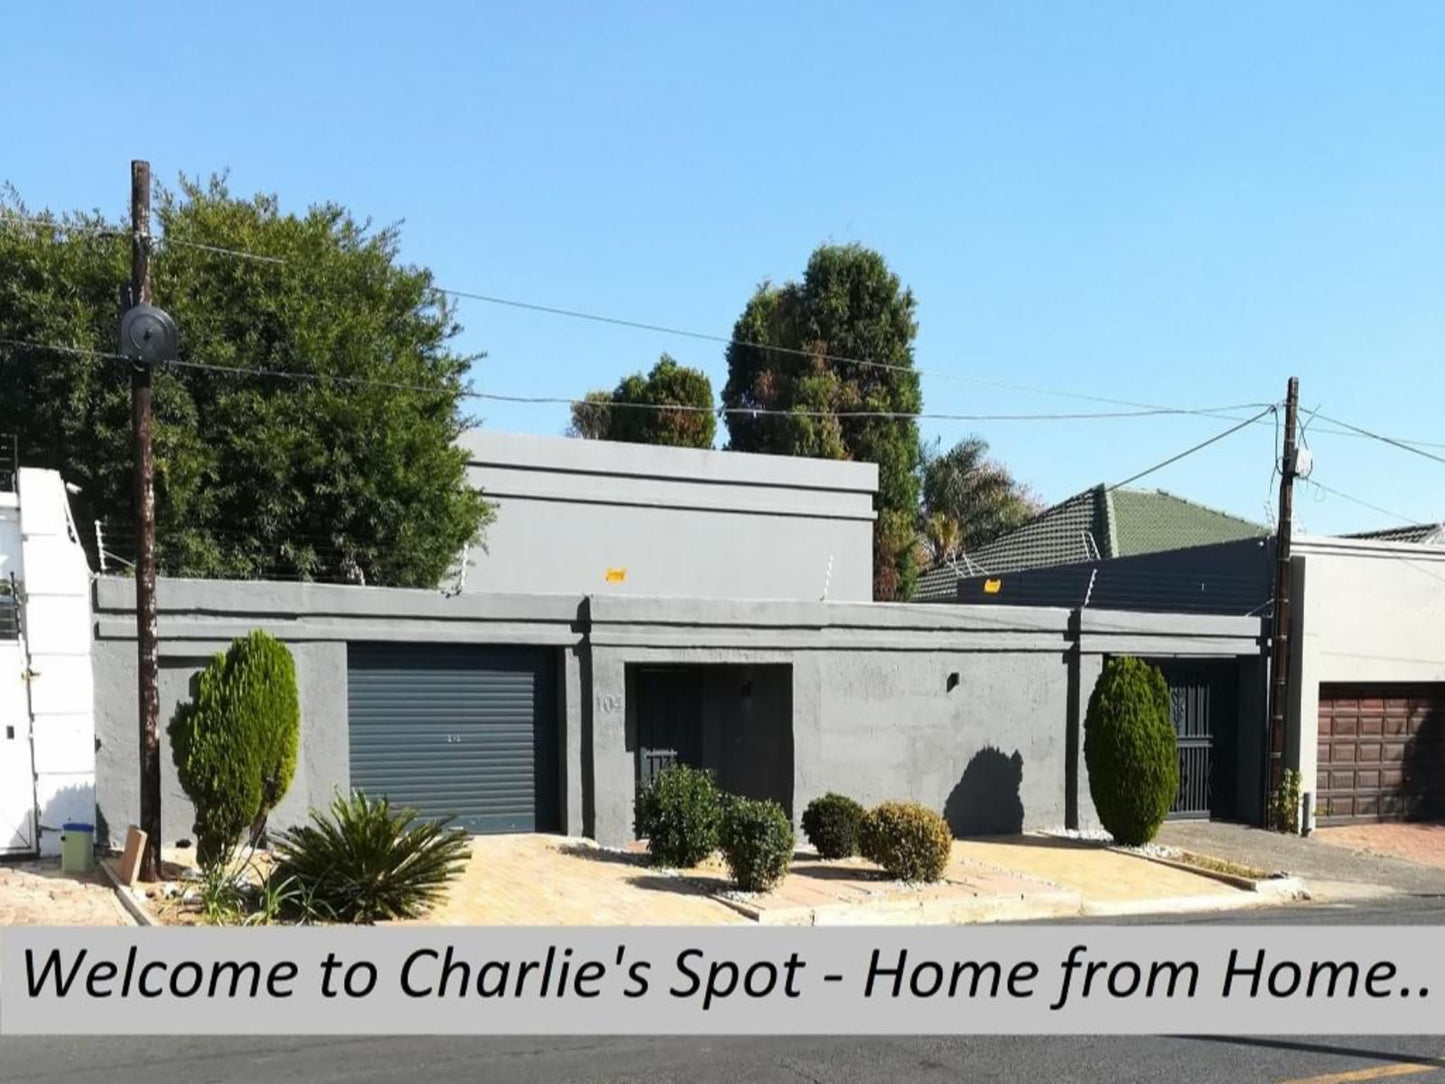 Charlie S Spot Norwood Johannesburg Gauteng South Africa House, Building, Architecture, Sign